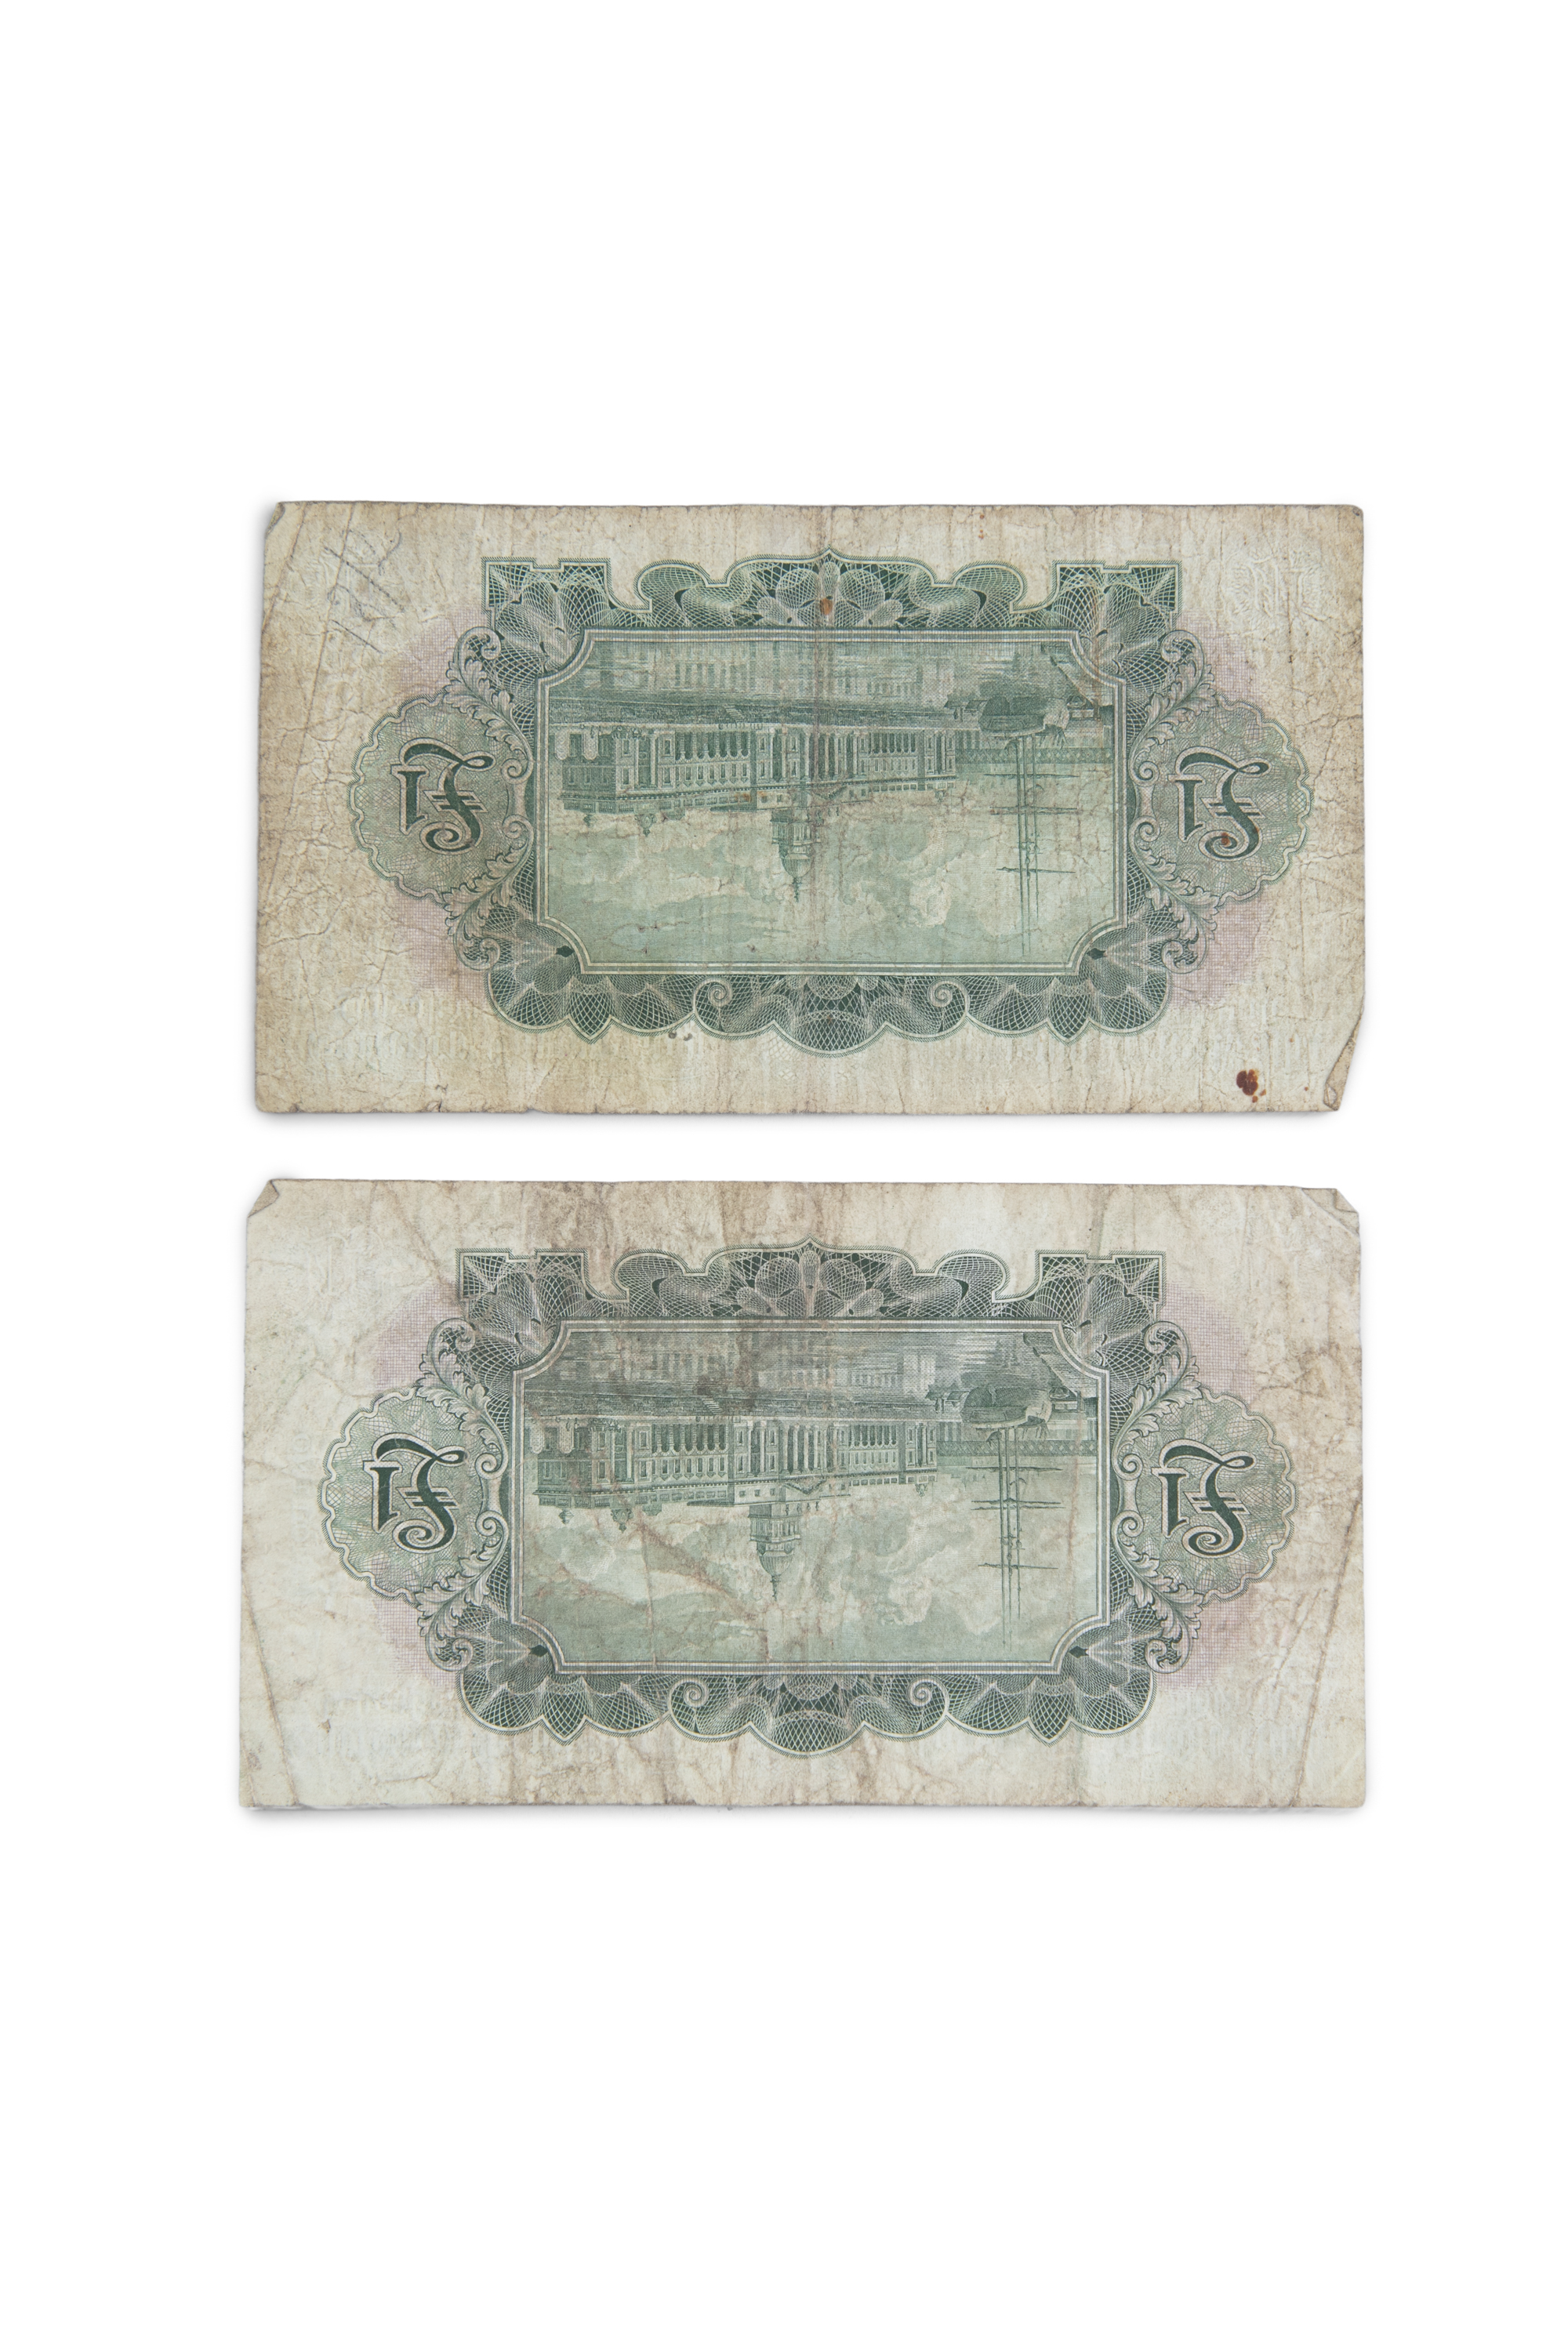 CURRENCY COMMISSION CONSOLIDATED BANKNOTE 'Ploughman' Ulster Bank One Pound 7-1-31; 5-8-37, - Image 2 of 2